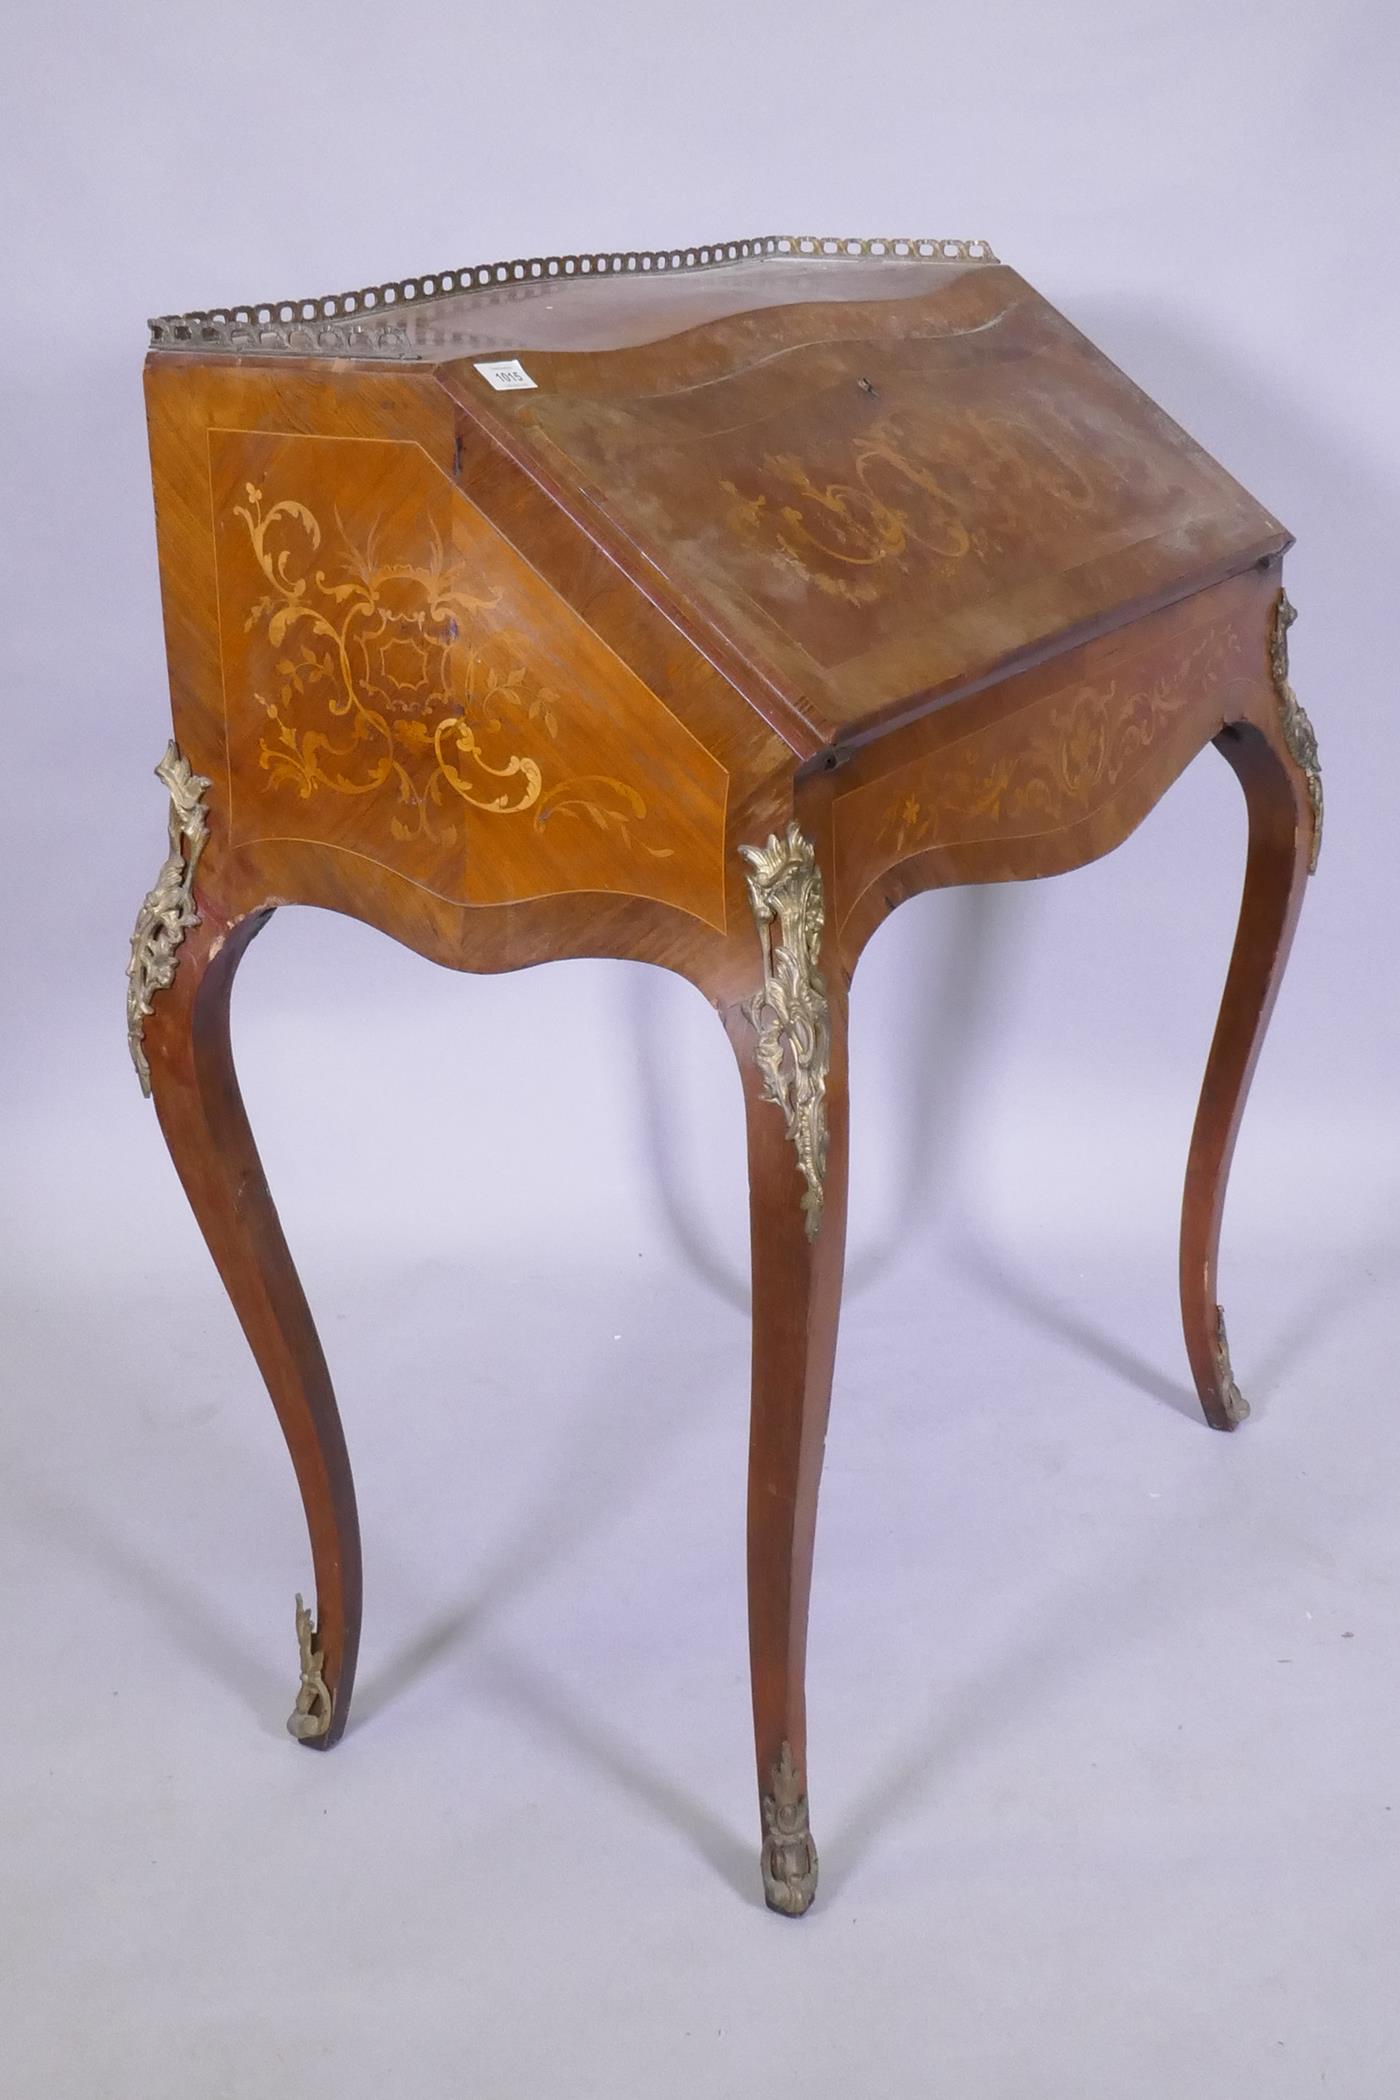 A C19th continental marquetry inlaid tulipwood and rosewood bonheure de jour, with pierced brass - Image 4 of 4